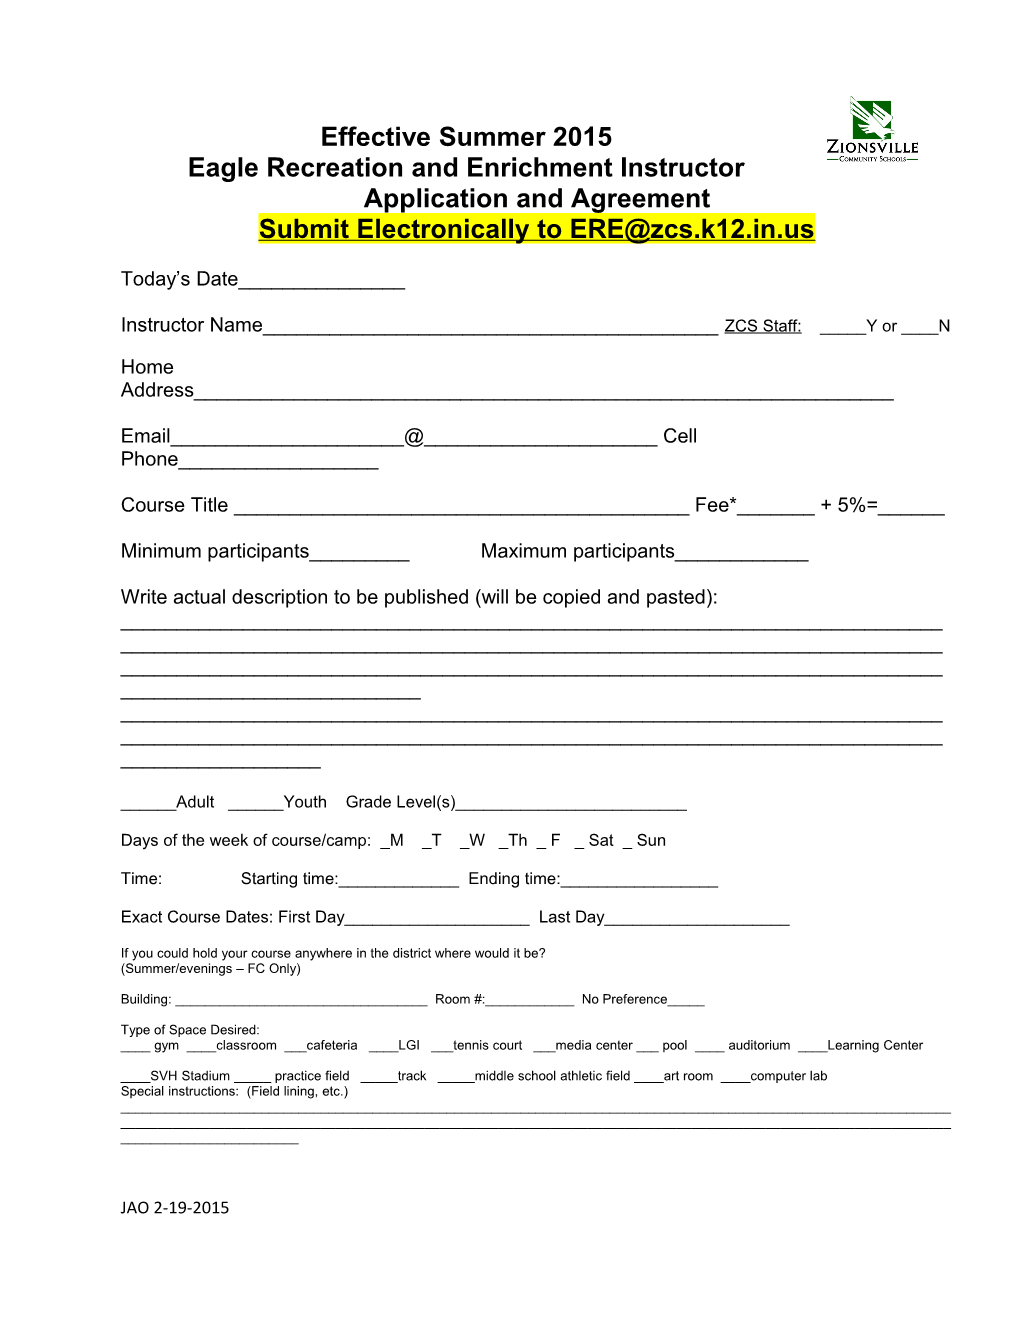 Eagle Recreation and Enrichment Instructor Application and Agreement